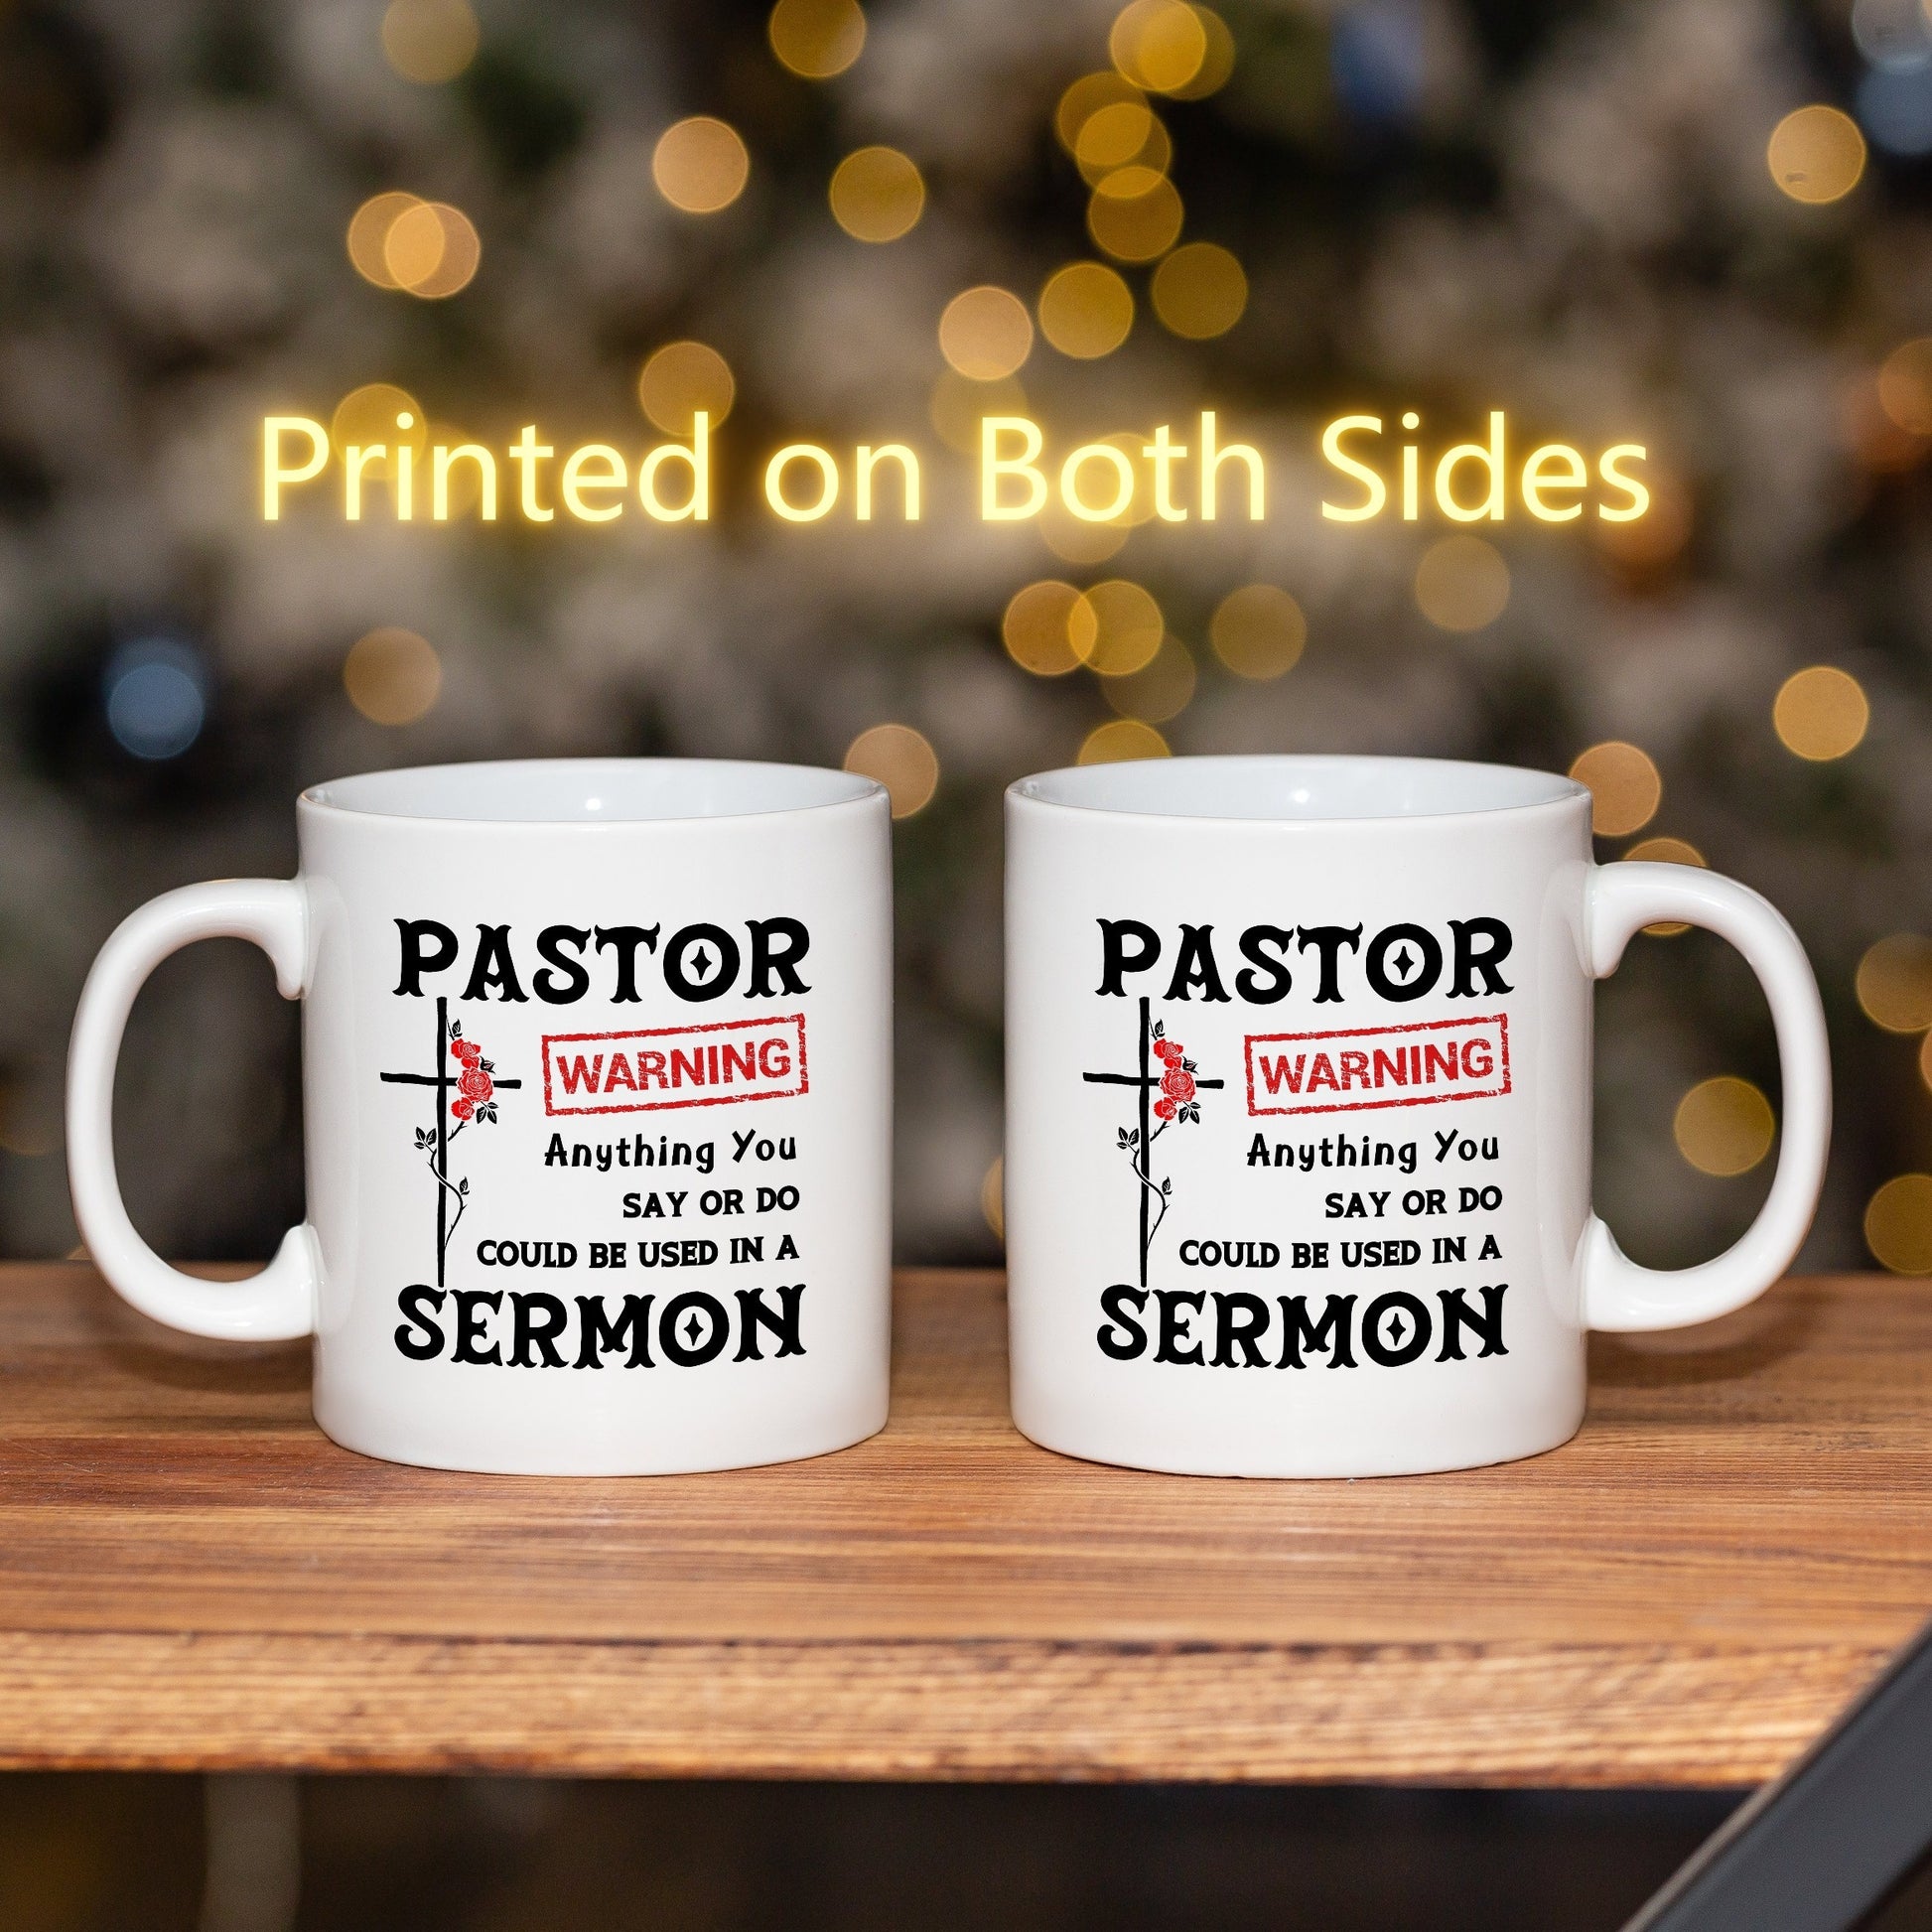 Pastor Warning: Anything You Say Or Do Could Be Used In A Sermon Christian White Ceramic Mug 11oz claimedbygoddesigns